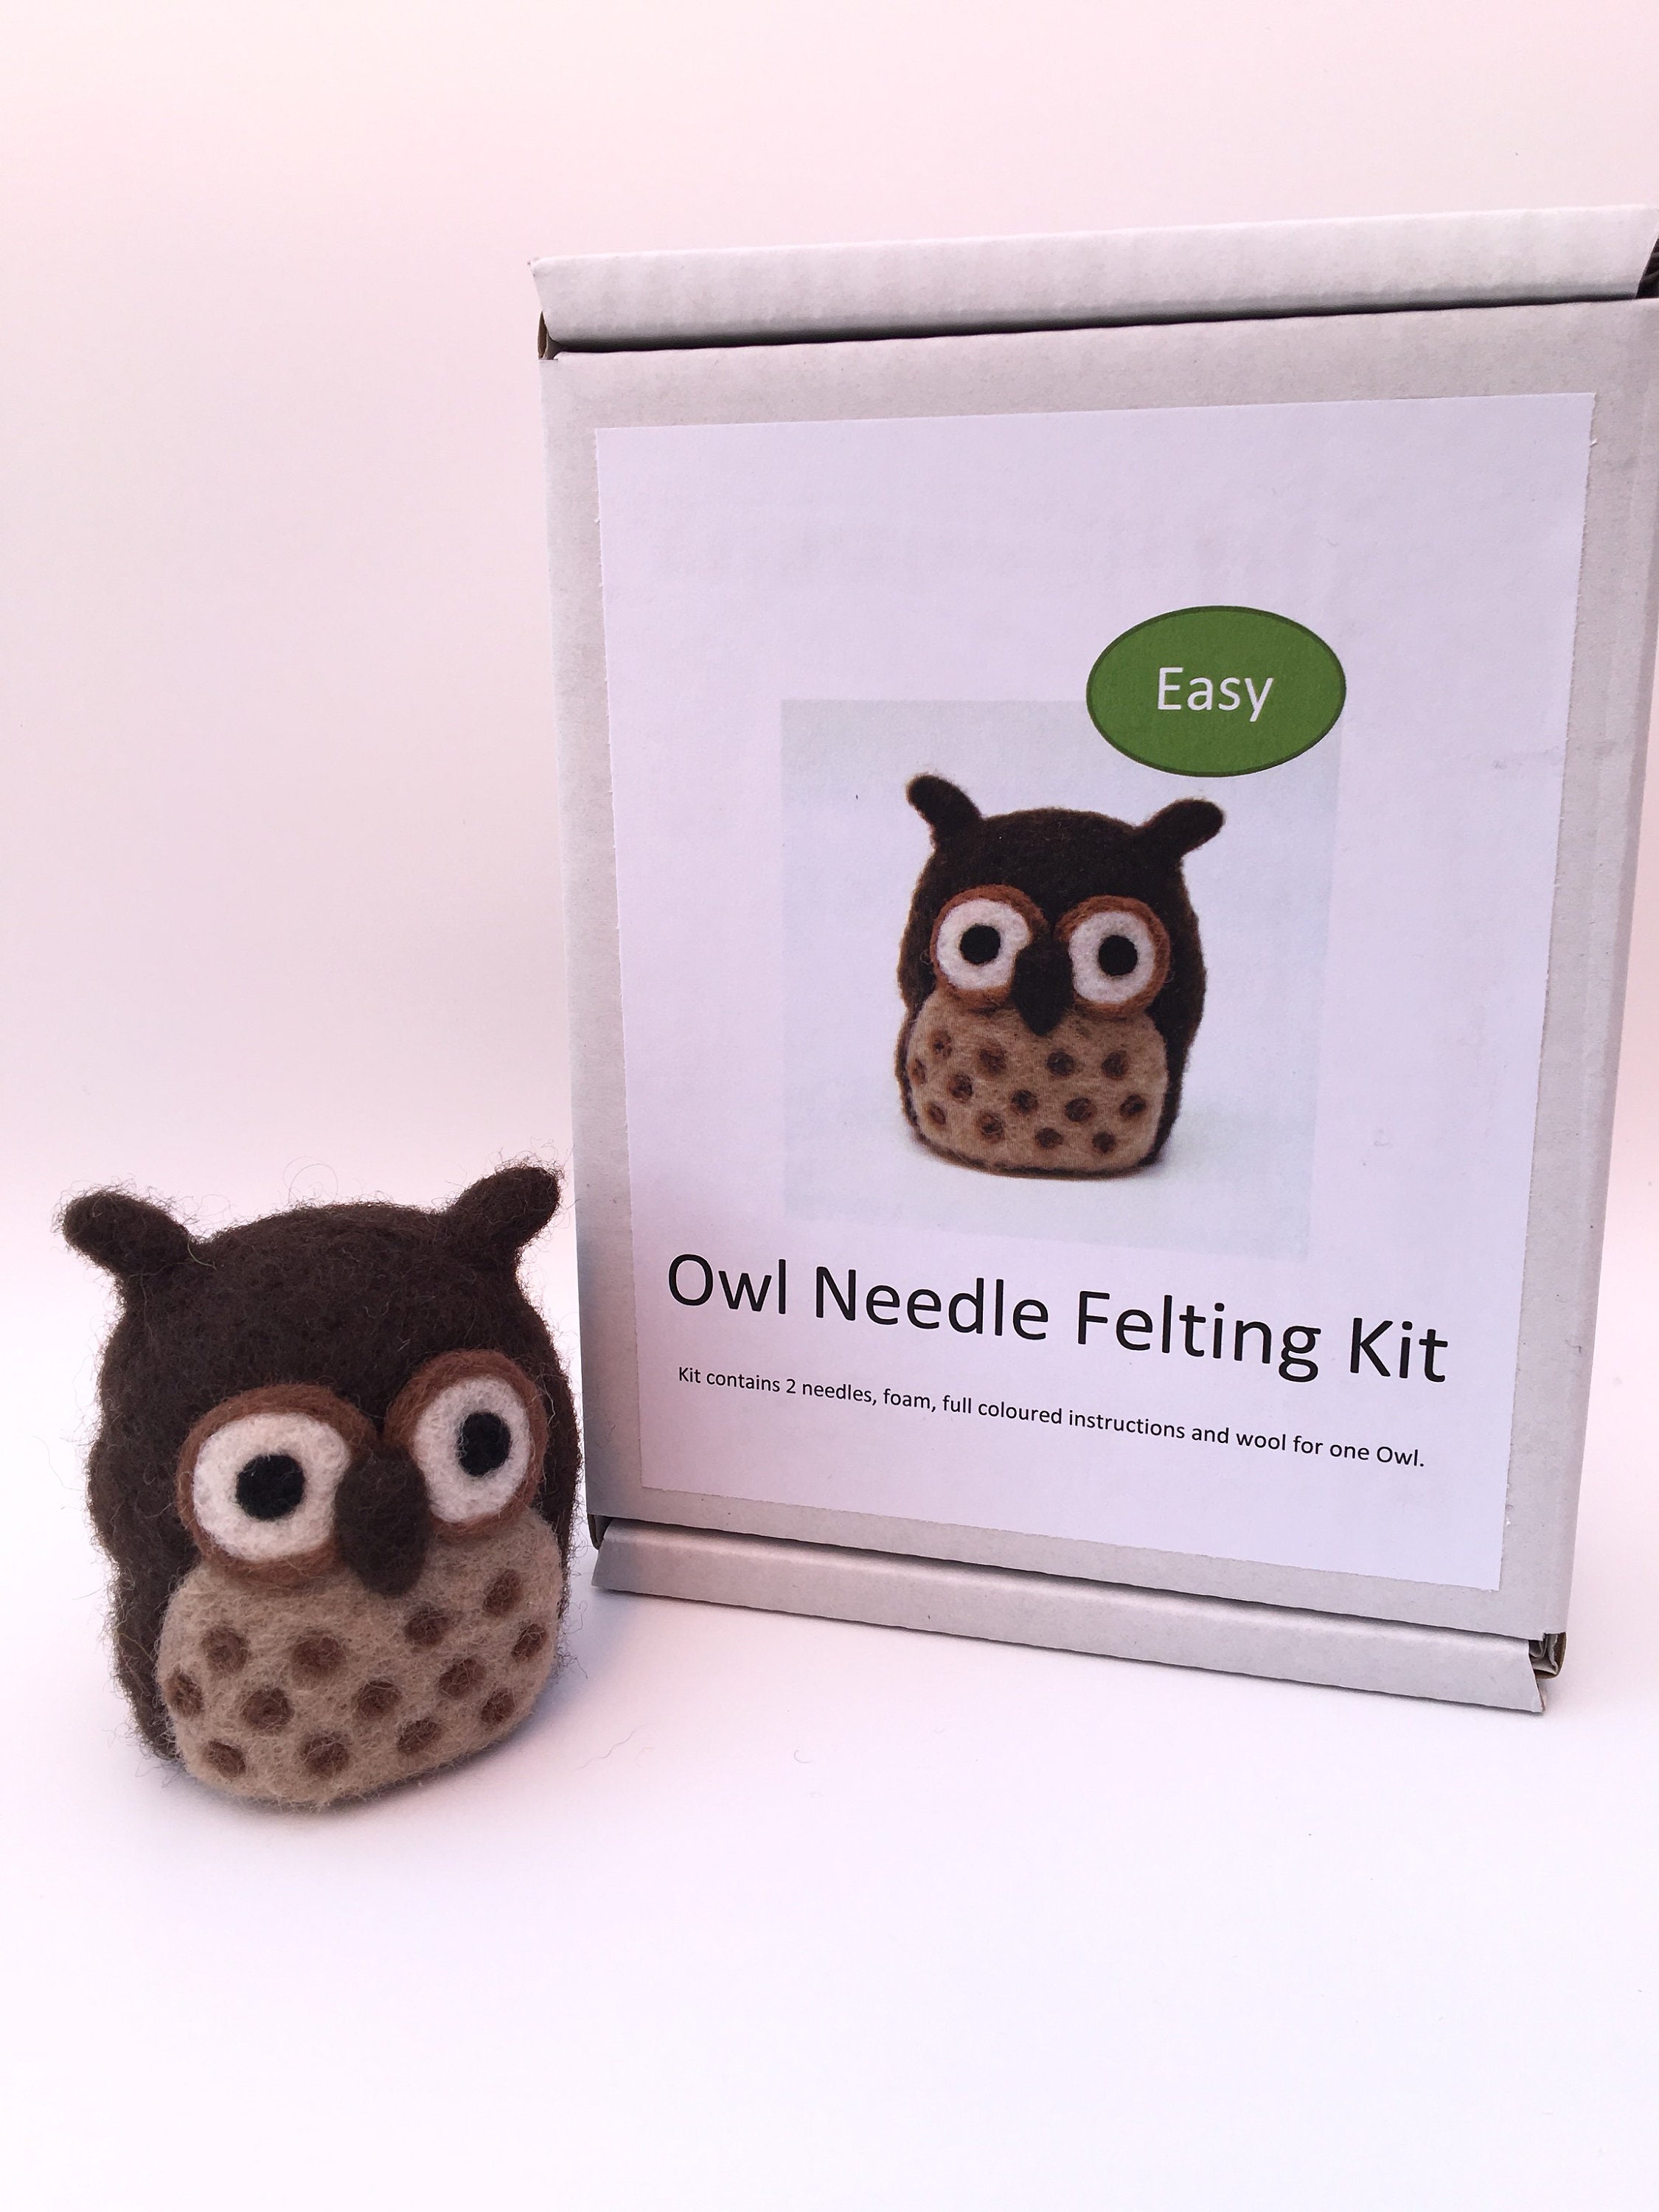 Needle Felting Kit for Beginners Cookie Cutter and Wool Set: Bird